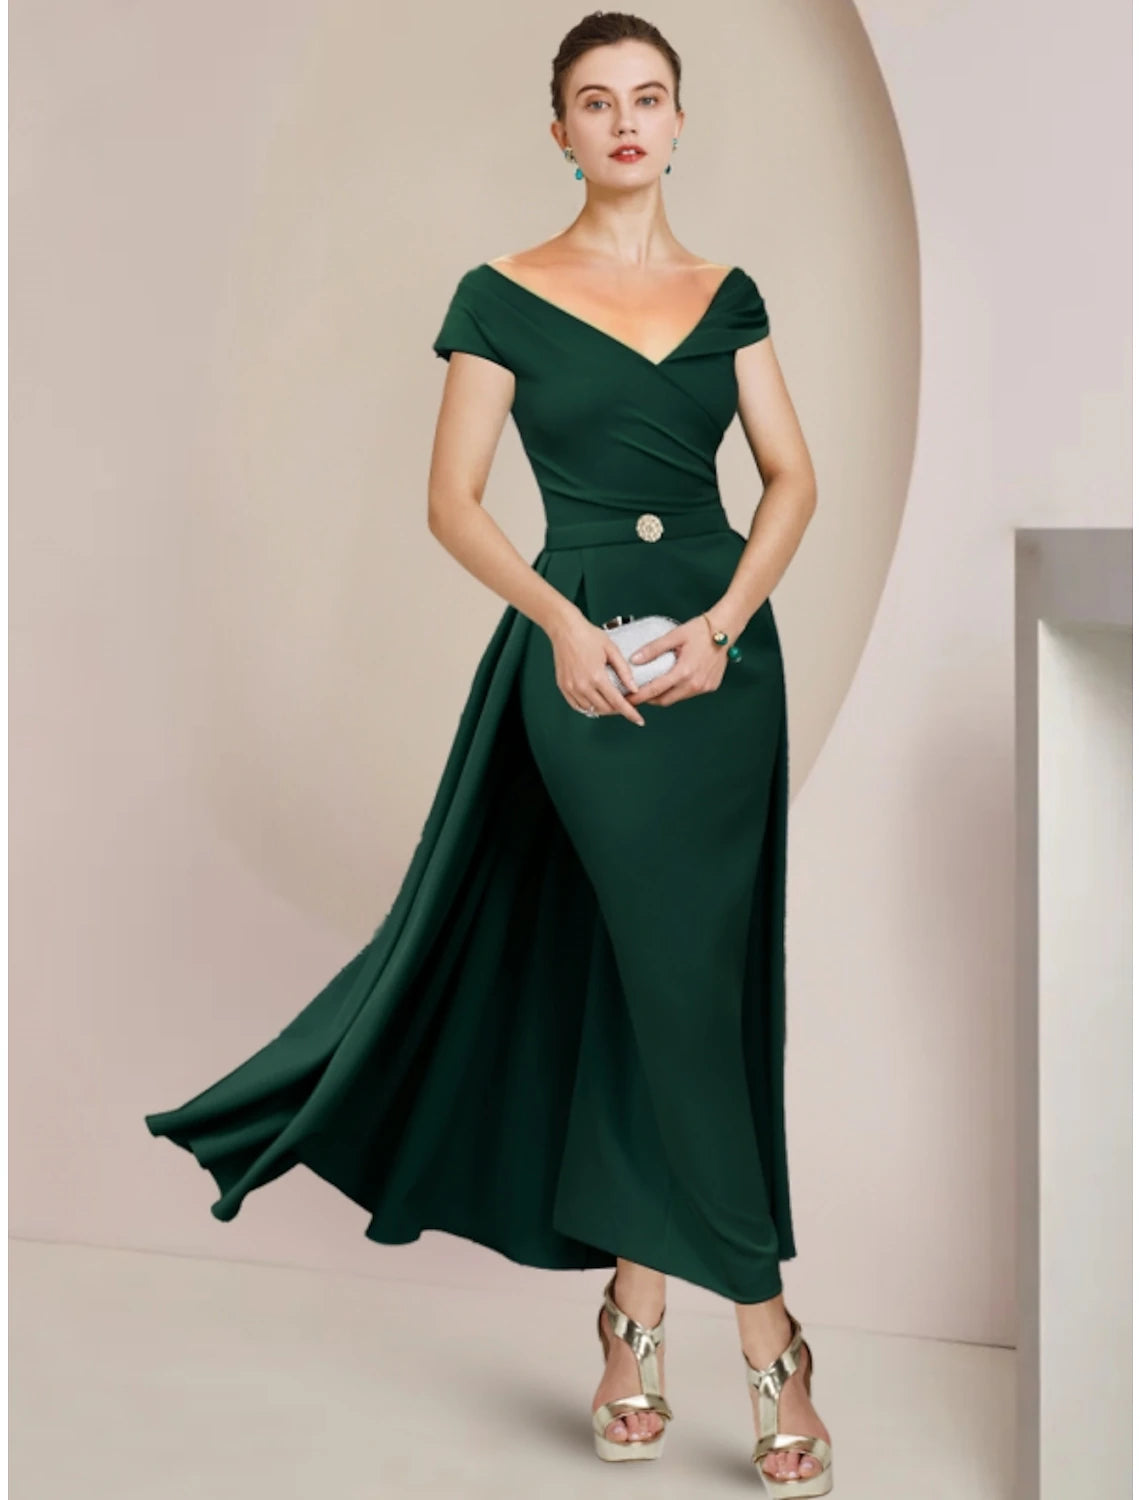 Sheath / Column Mother of the Bride Dress Wedding Guest Party Elegant V Neck Ankle Length Stretch Fabric Short Sleeve with Pleats Crystal Brooch